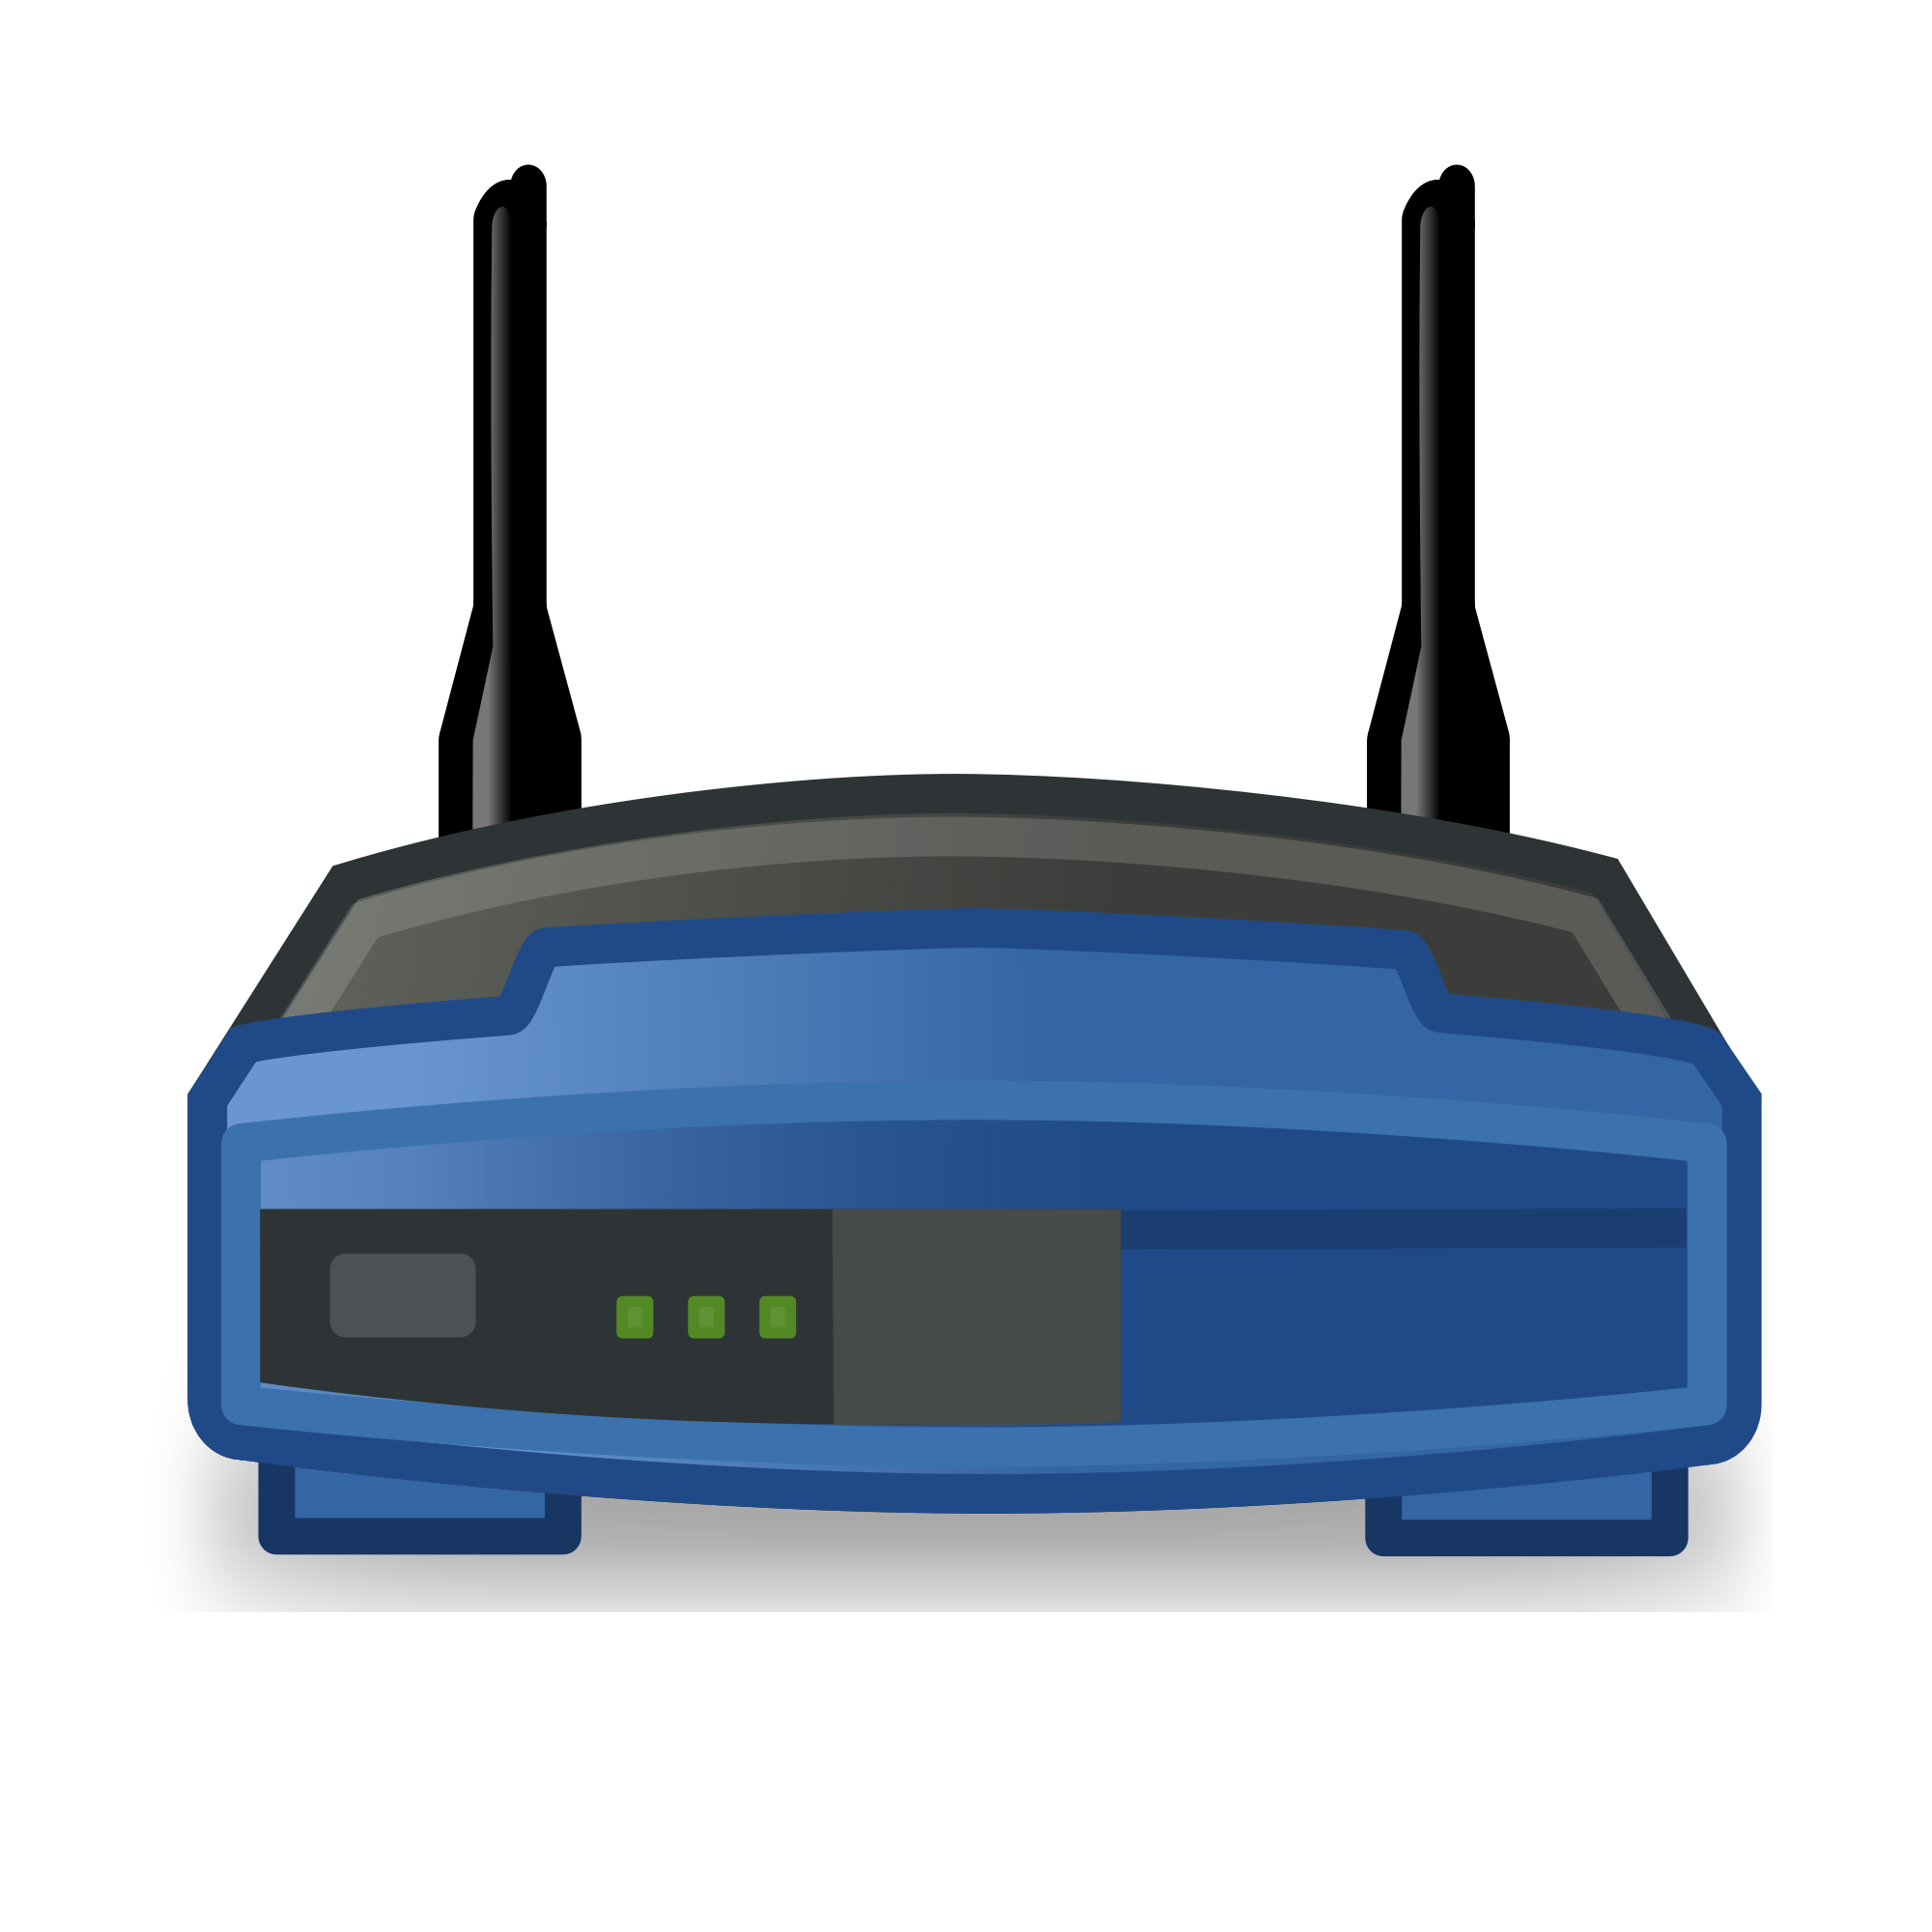 How to choose a Wireless Router